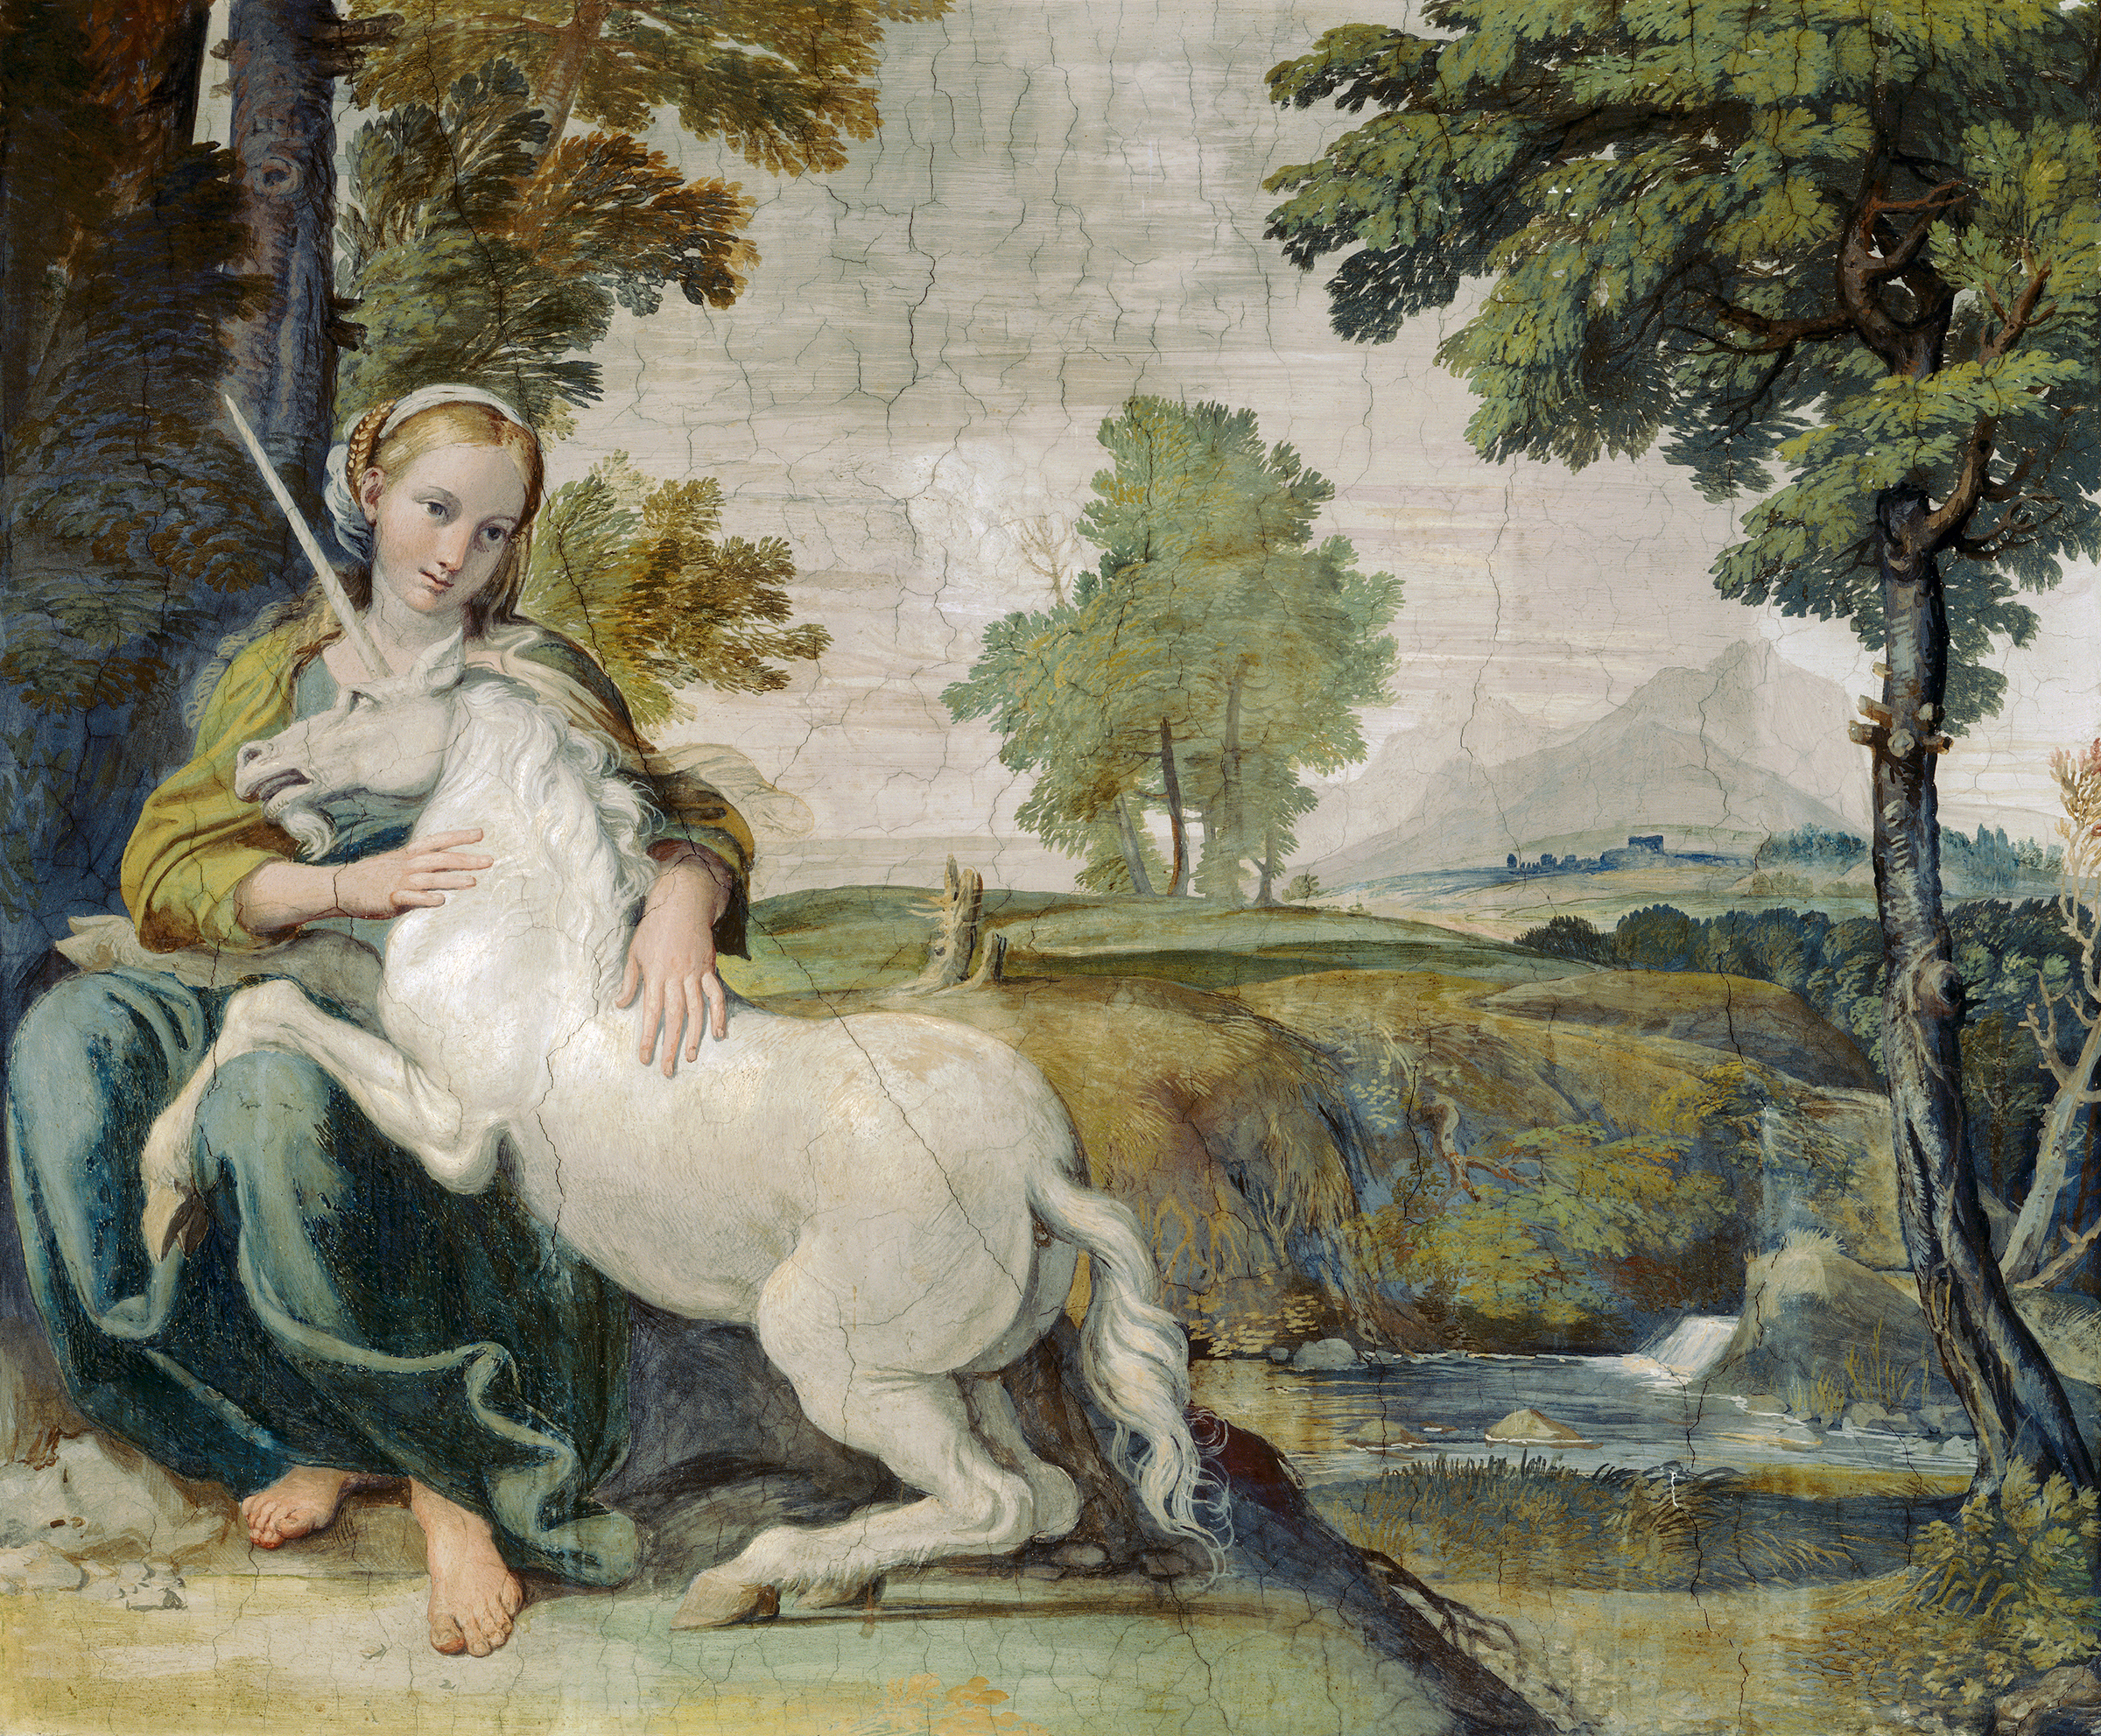 A barefoot young woman sits on a tree with a unicorn in her lap surrounded by hills and trees.